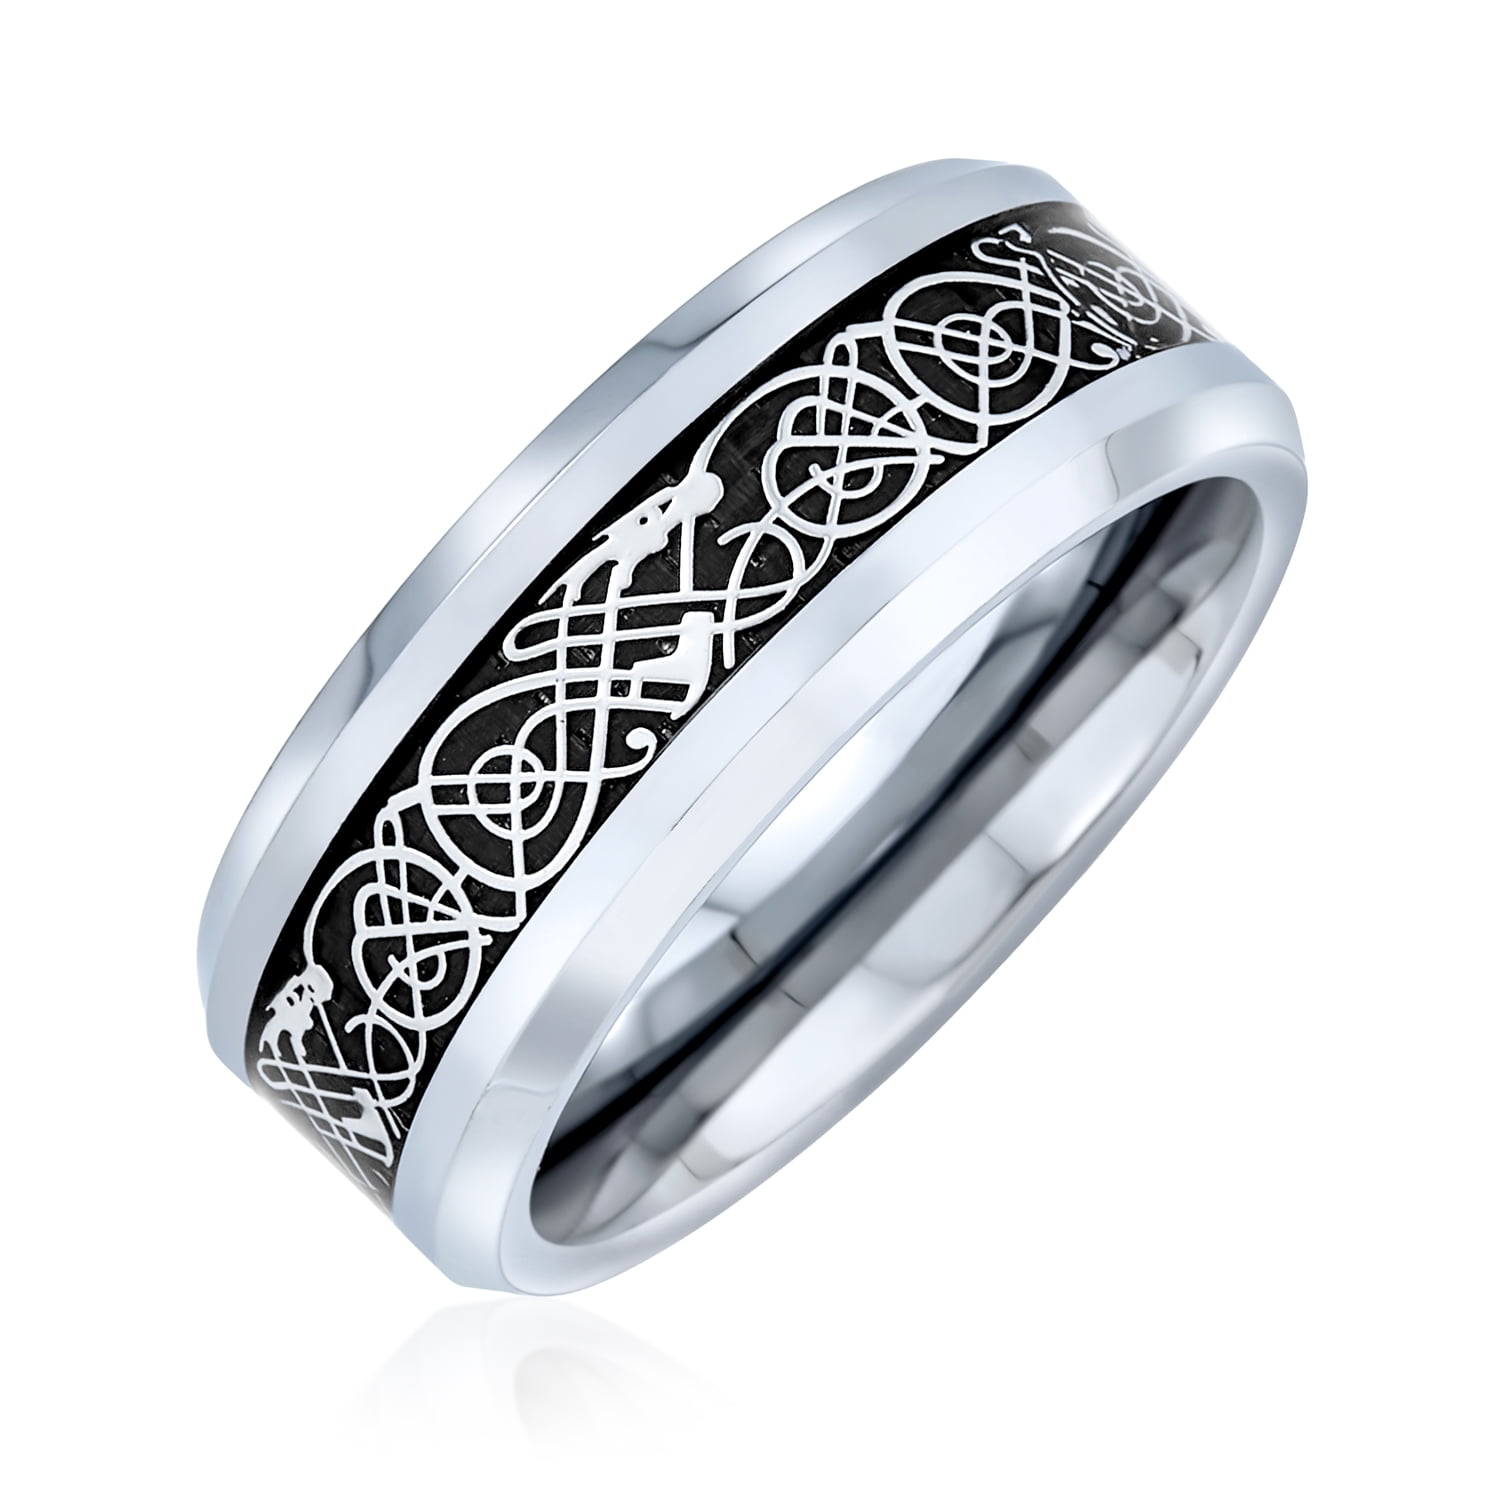 Details about   Men's Stainless Steel Black Onyx Center Inlay Ring Band 